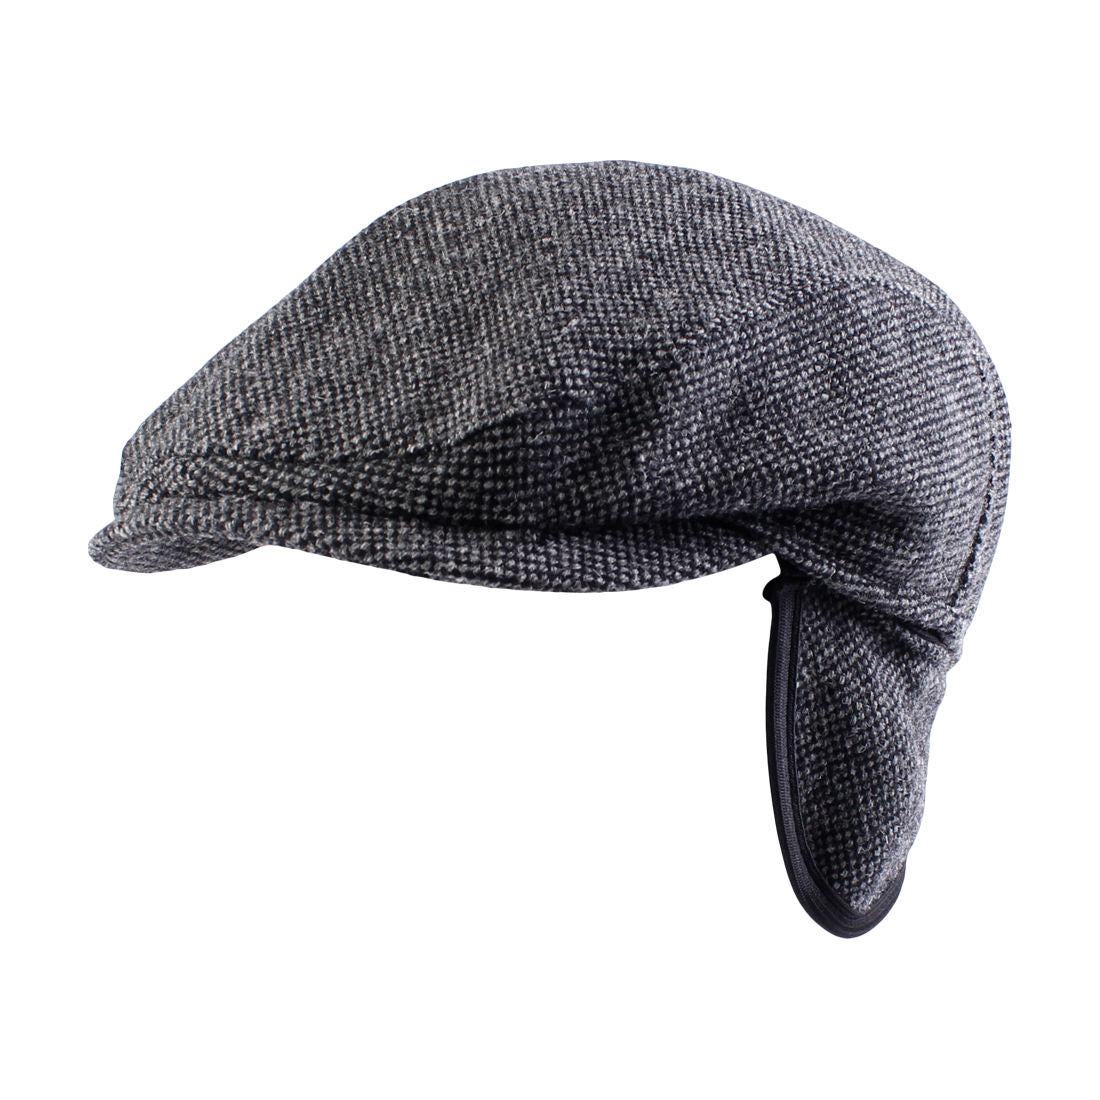 Ivy Slim Cap with Earflaps in Donegal Shetland Wool (Choice of Colors) by Wigens